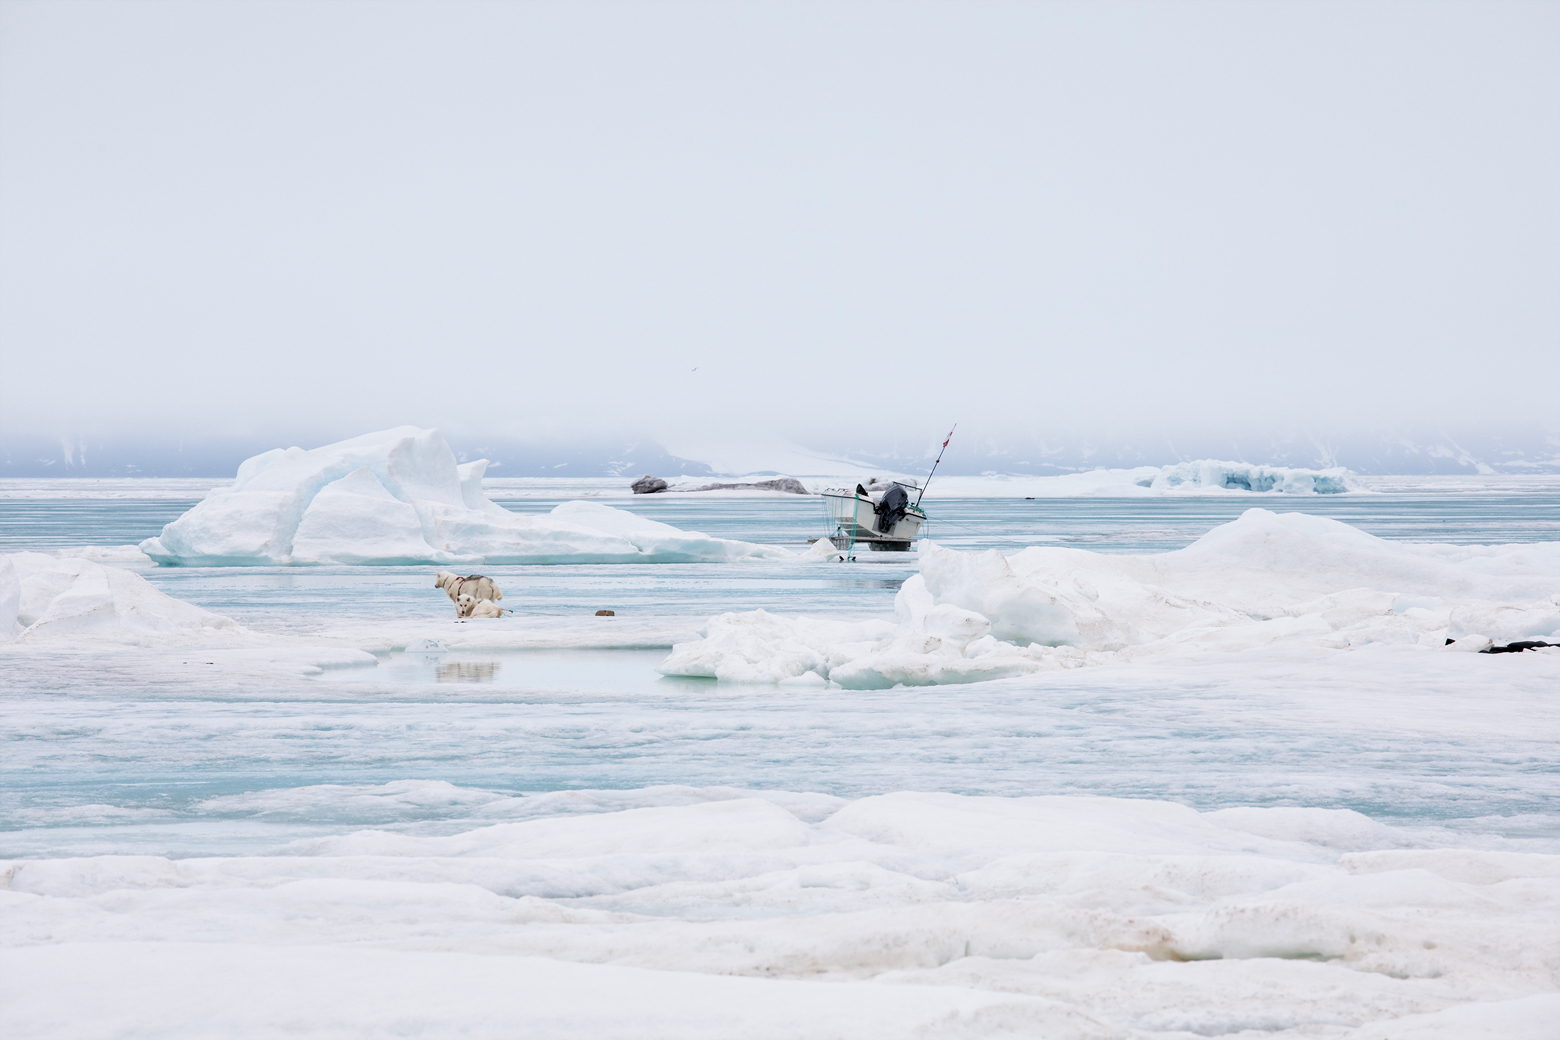 Working dogs and a boat on the sea ice at Qaanaaq, Greenland, photographed by Anna Filipova.